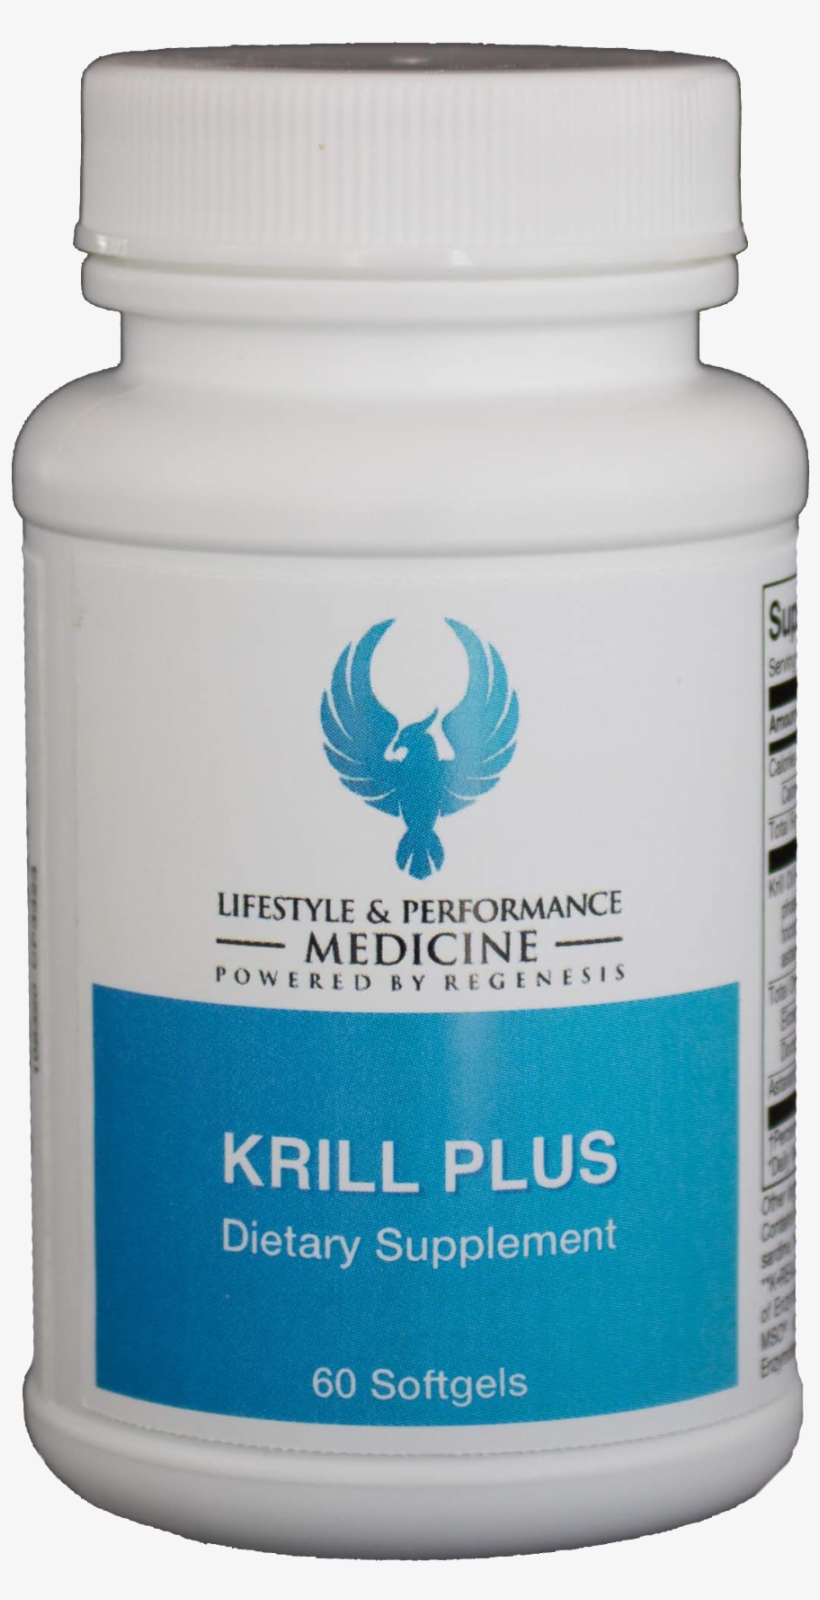 Krill Plus Is A Natural Source Of Omega 3 Fatty Acids, transparent png #5801292